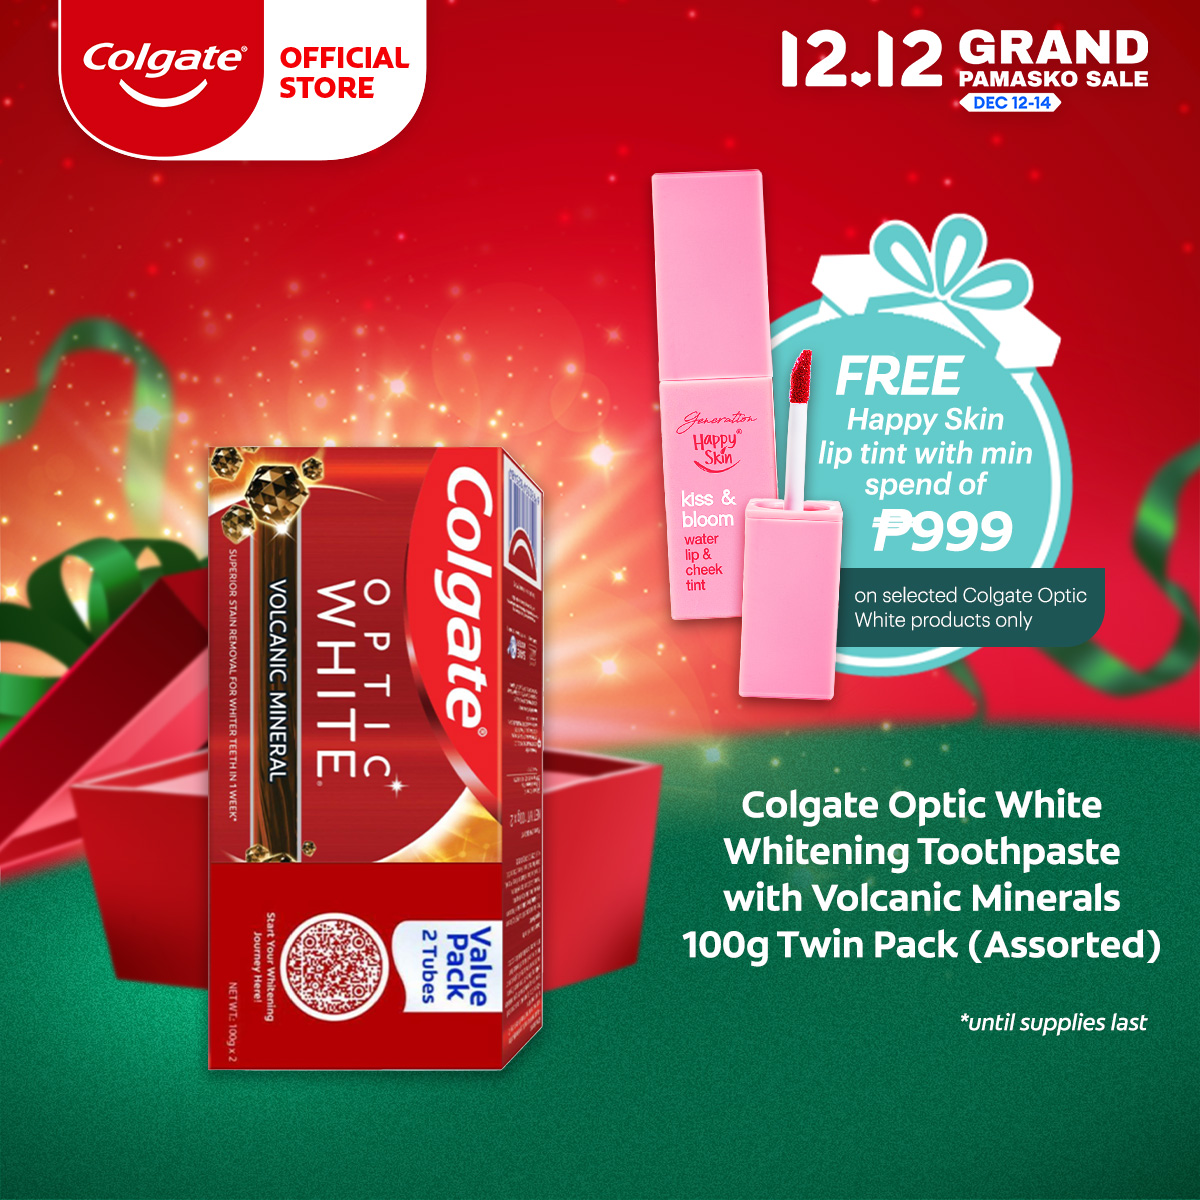 Lazada Philippines - Colgate Optic White Whitening Toothpaste with Volcanic Minerals 100g Twin Pack (Assorted)